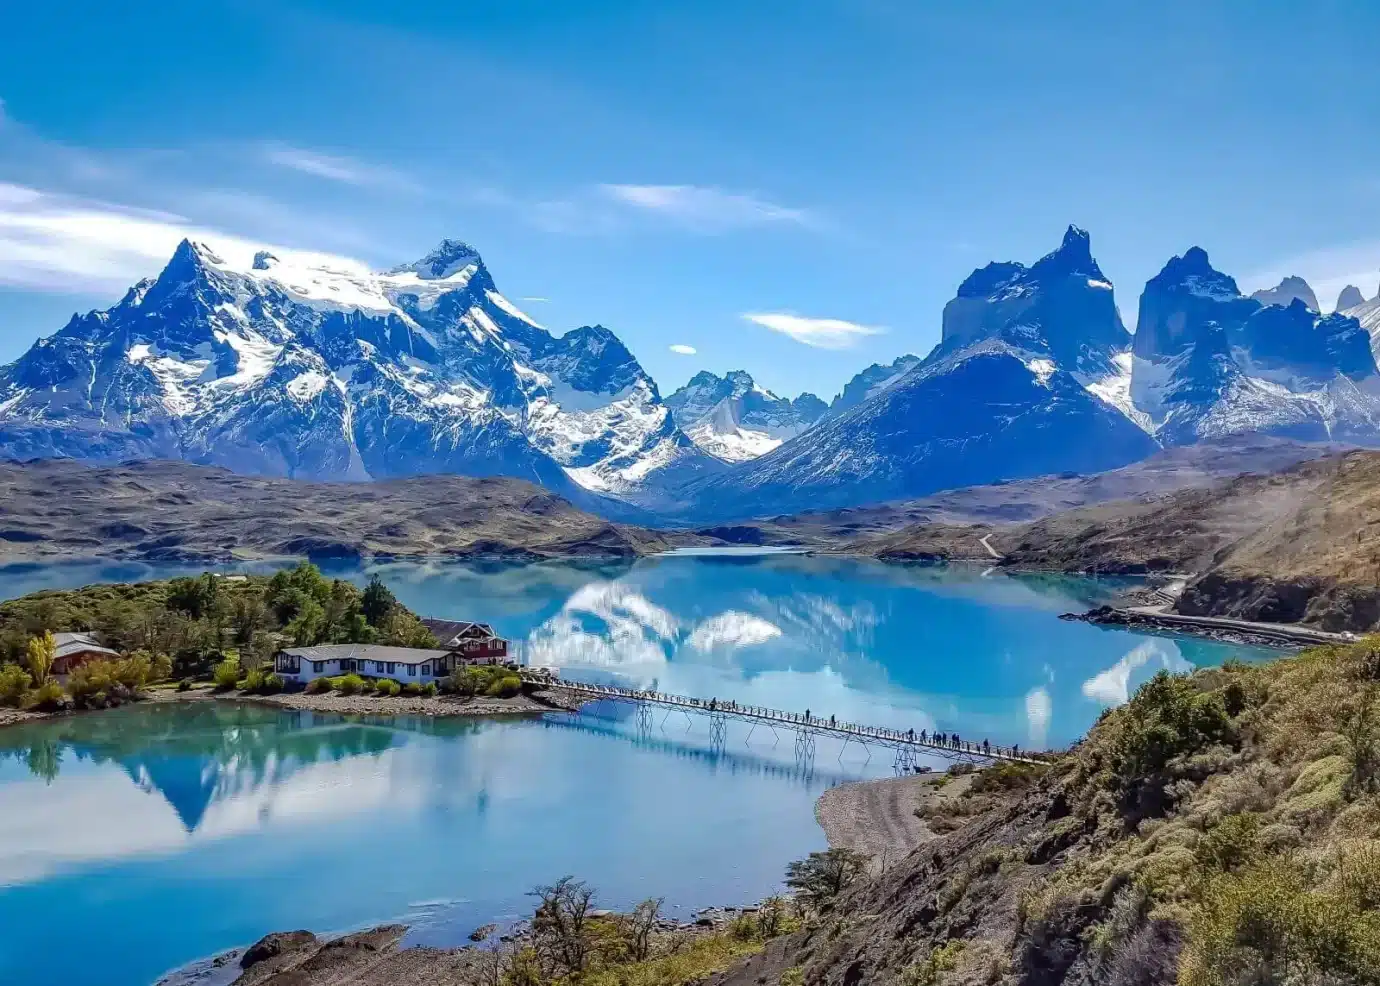 TORRES DEL PAINE NATIONAL PARK AND PUERTO NATALES